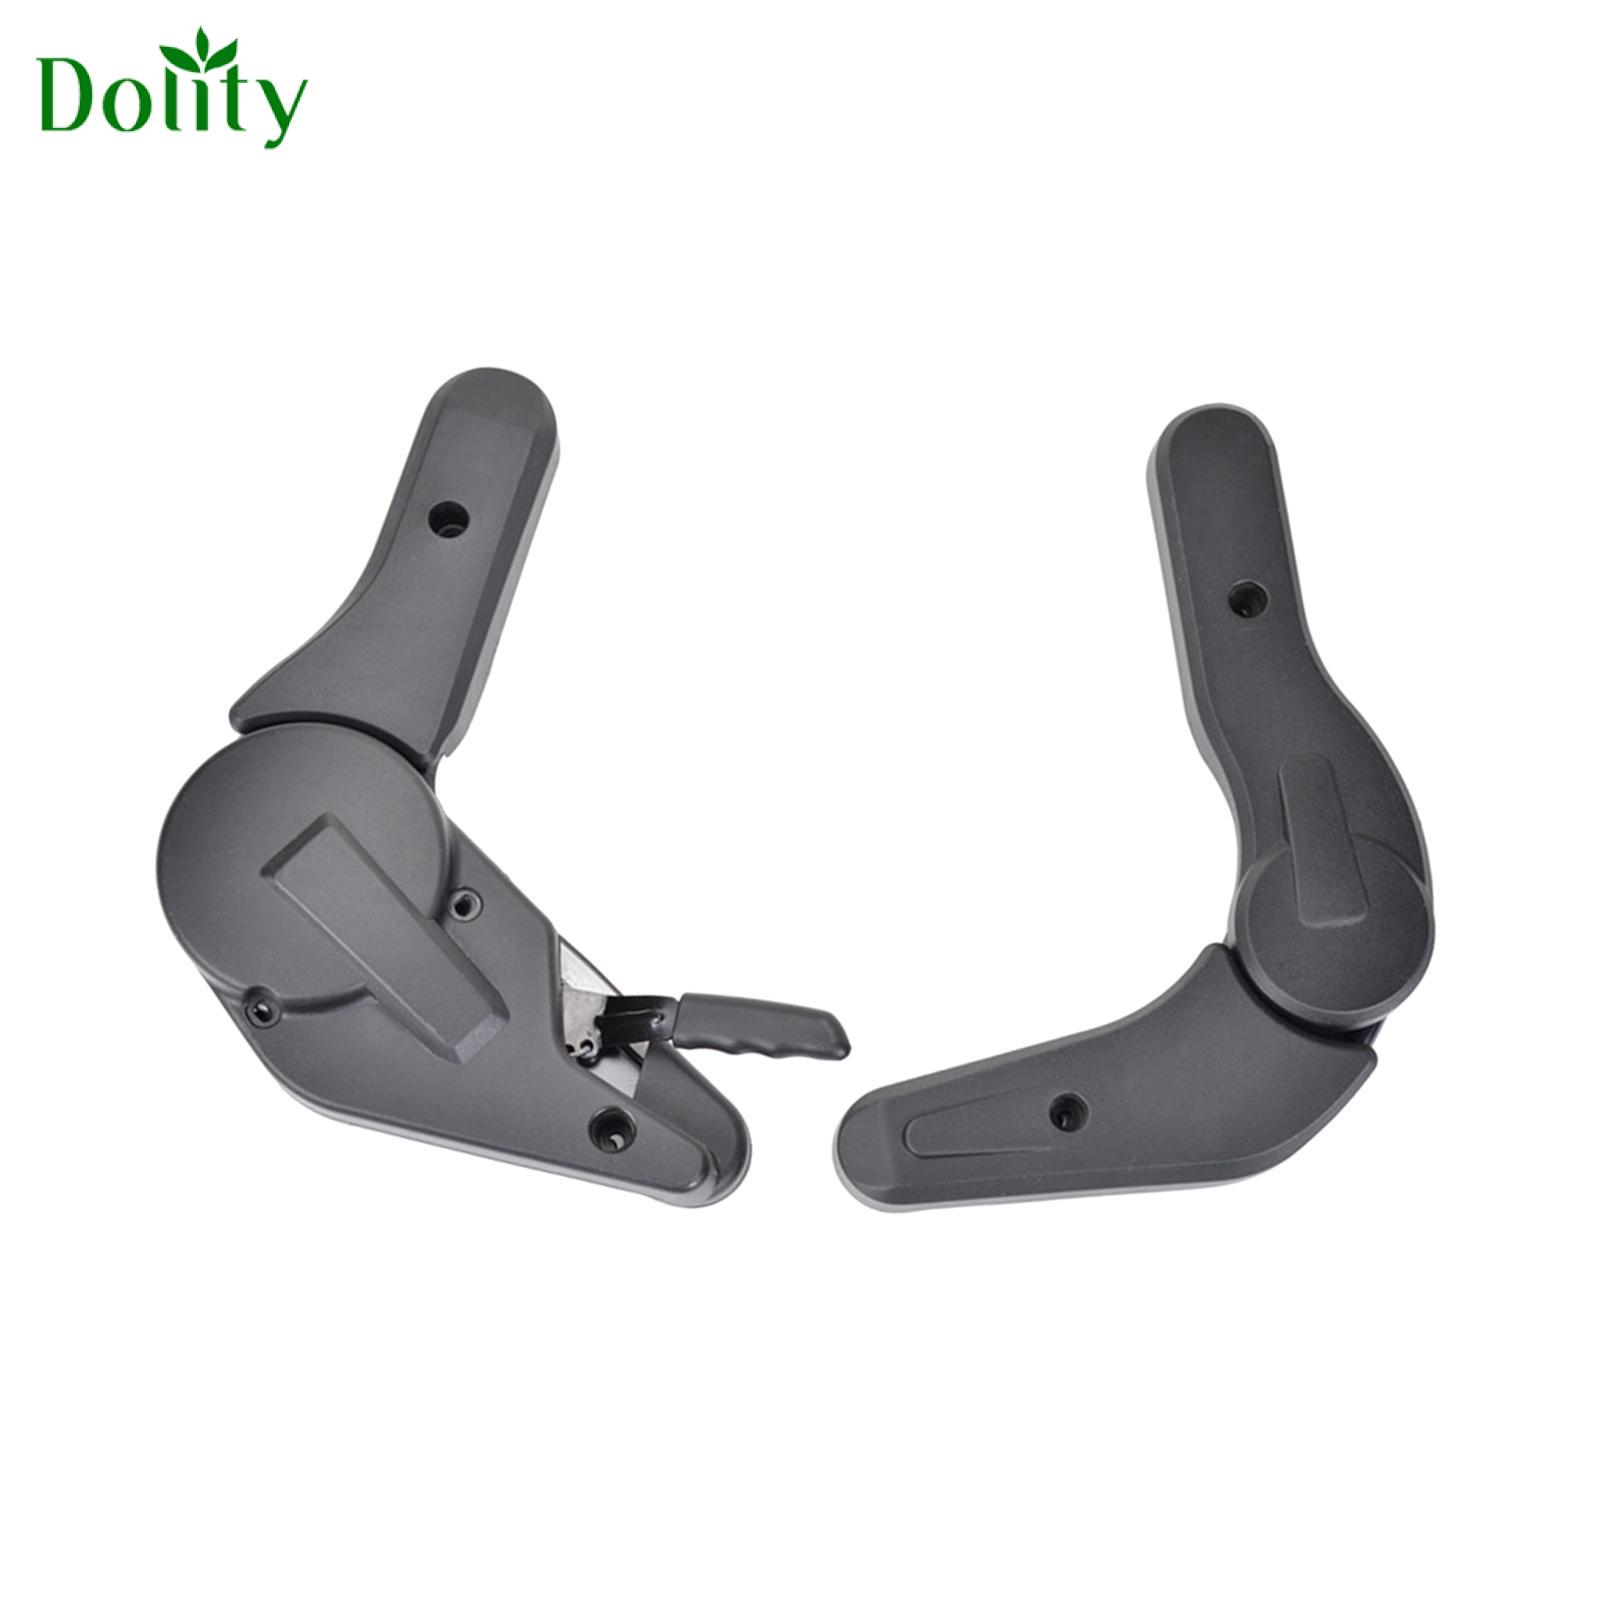 Dolity Gamer Chair 180 Degree Angle Adjuster Metal Material Spare Parts